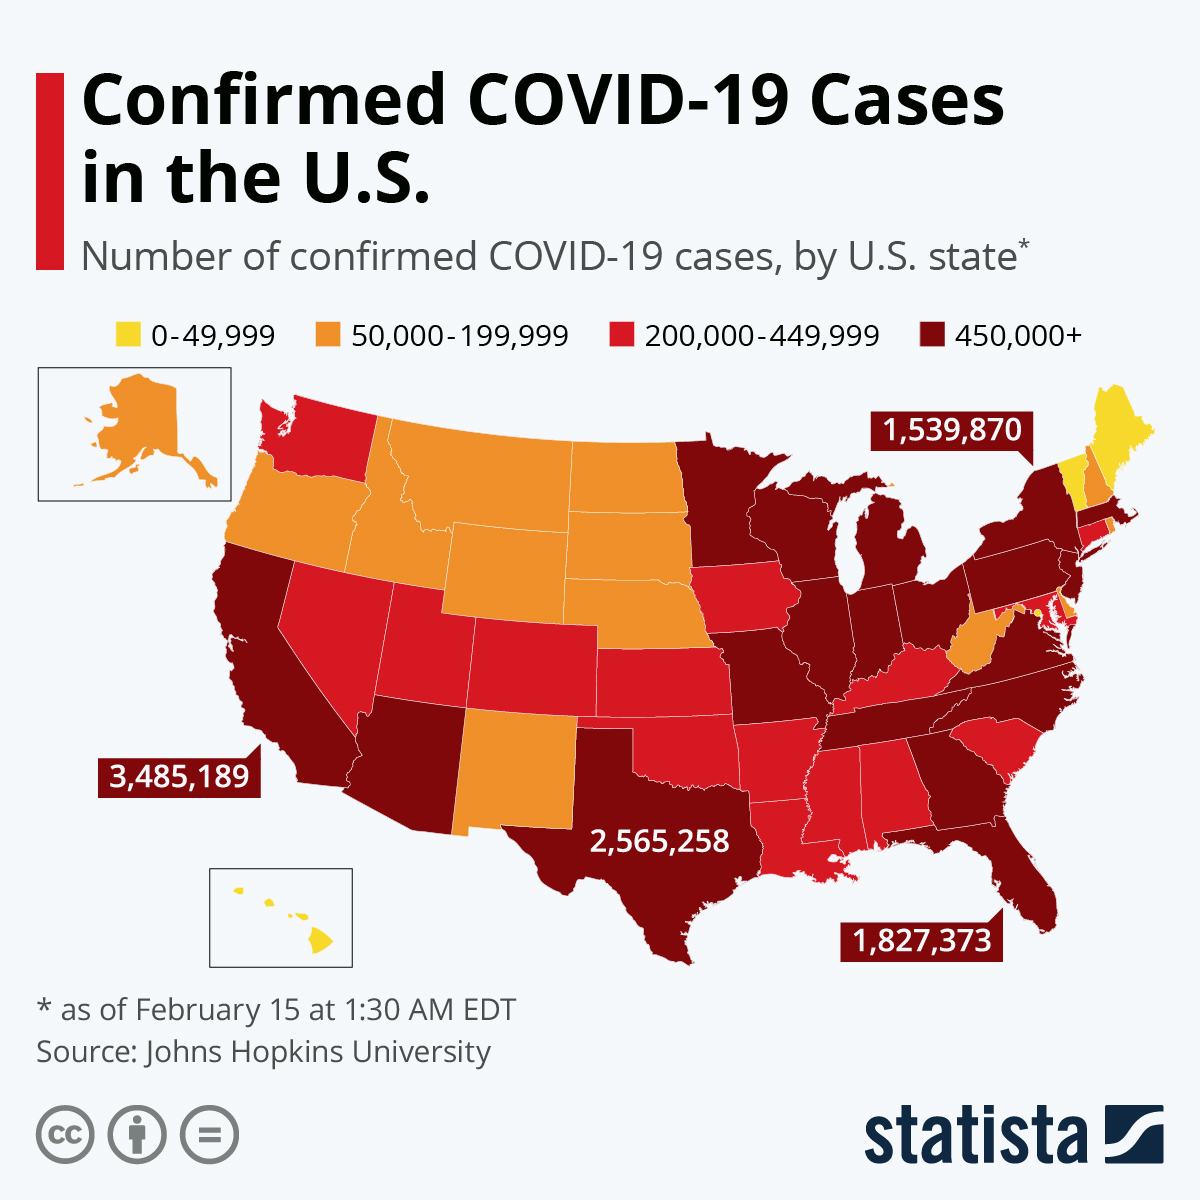 Confirmed COVID-19 Cases in the U.S.